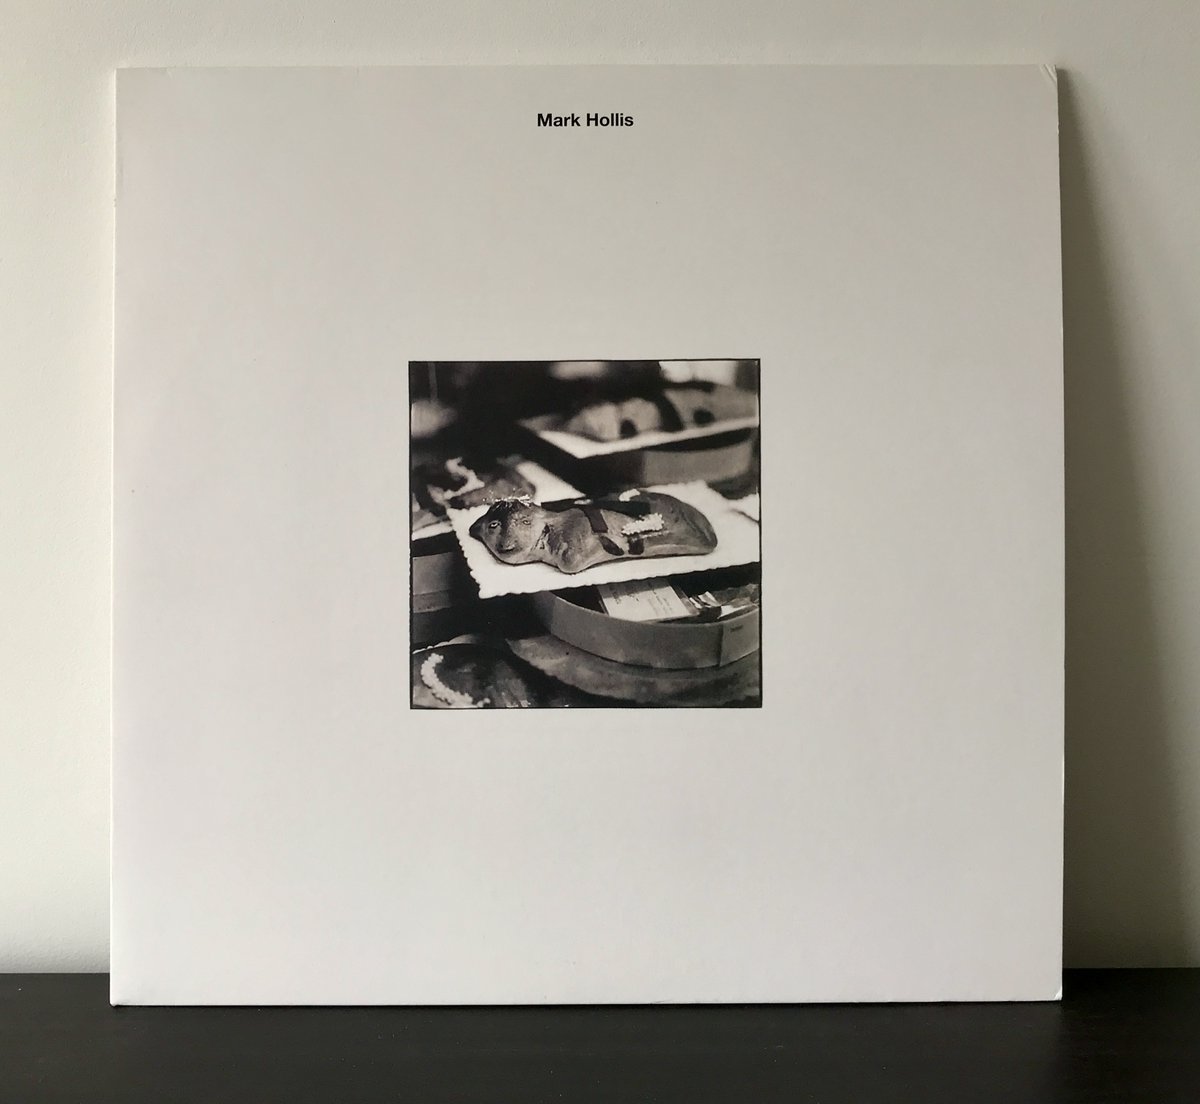 #NowPlaying Mark Hollis 1998 A choice that satisfies my reflective and introspective mood this evening...